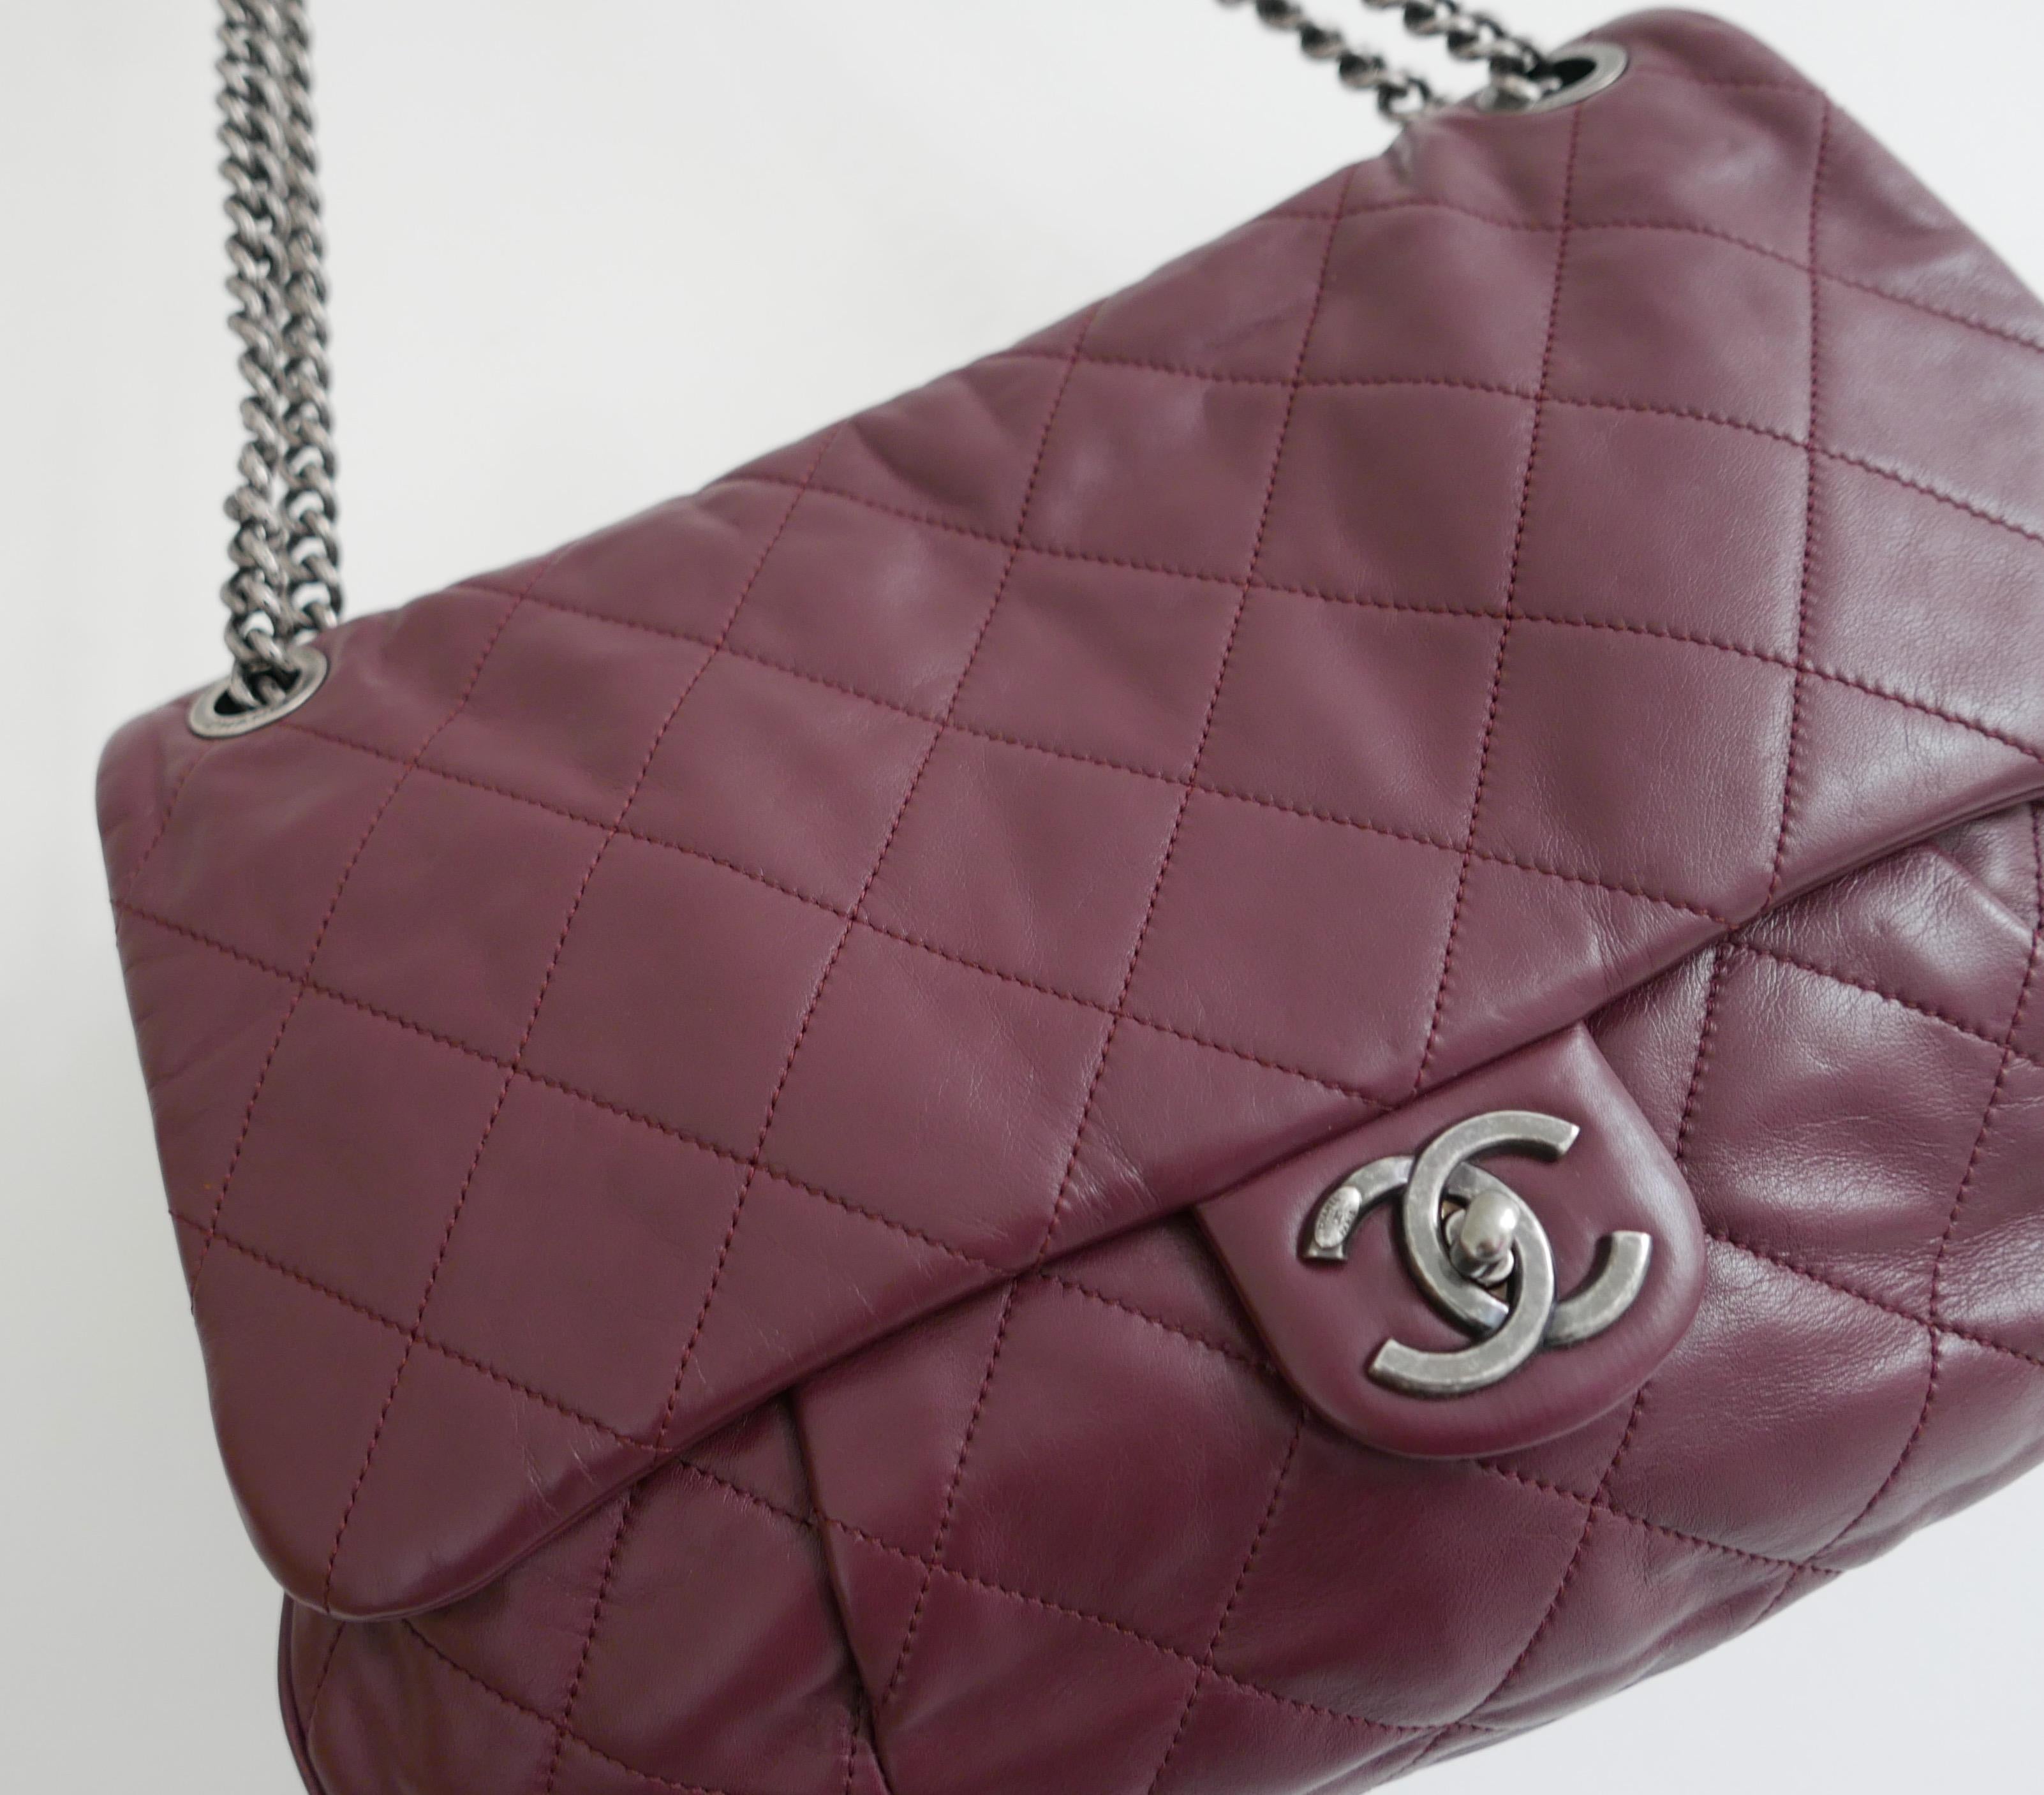 Women's Chanel Coco Pleats Flap Bag Burgundy Quilted Leather For Sale